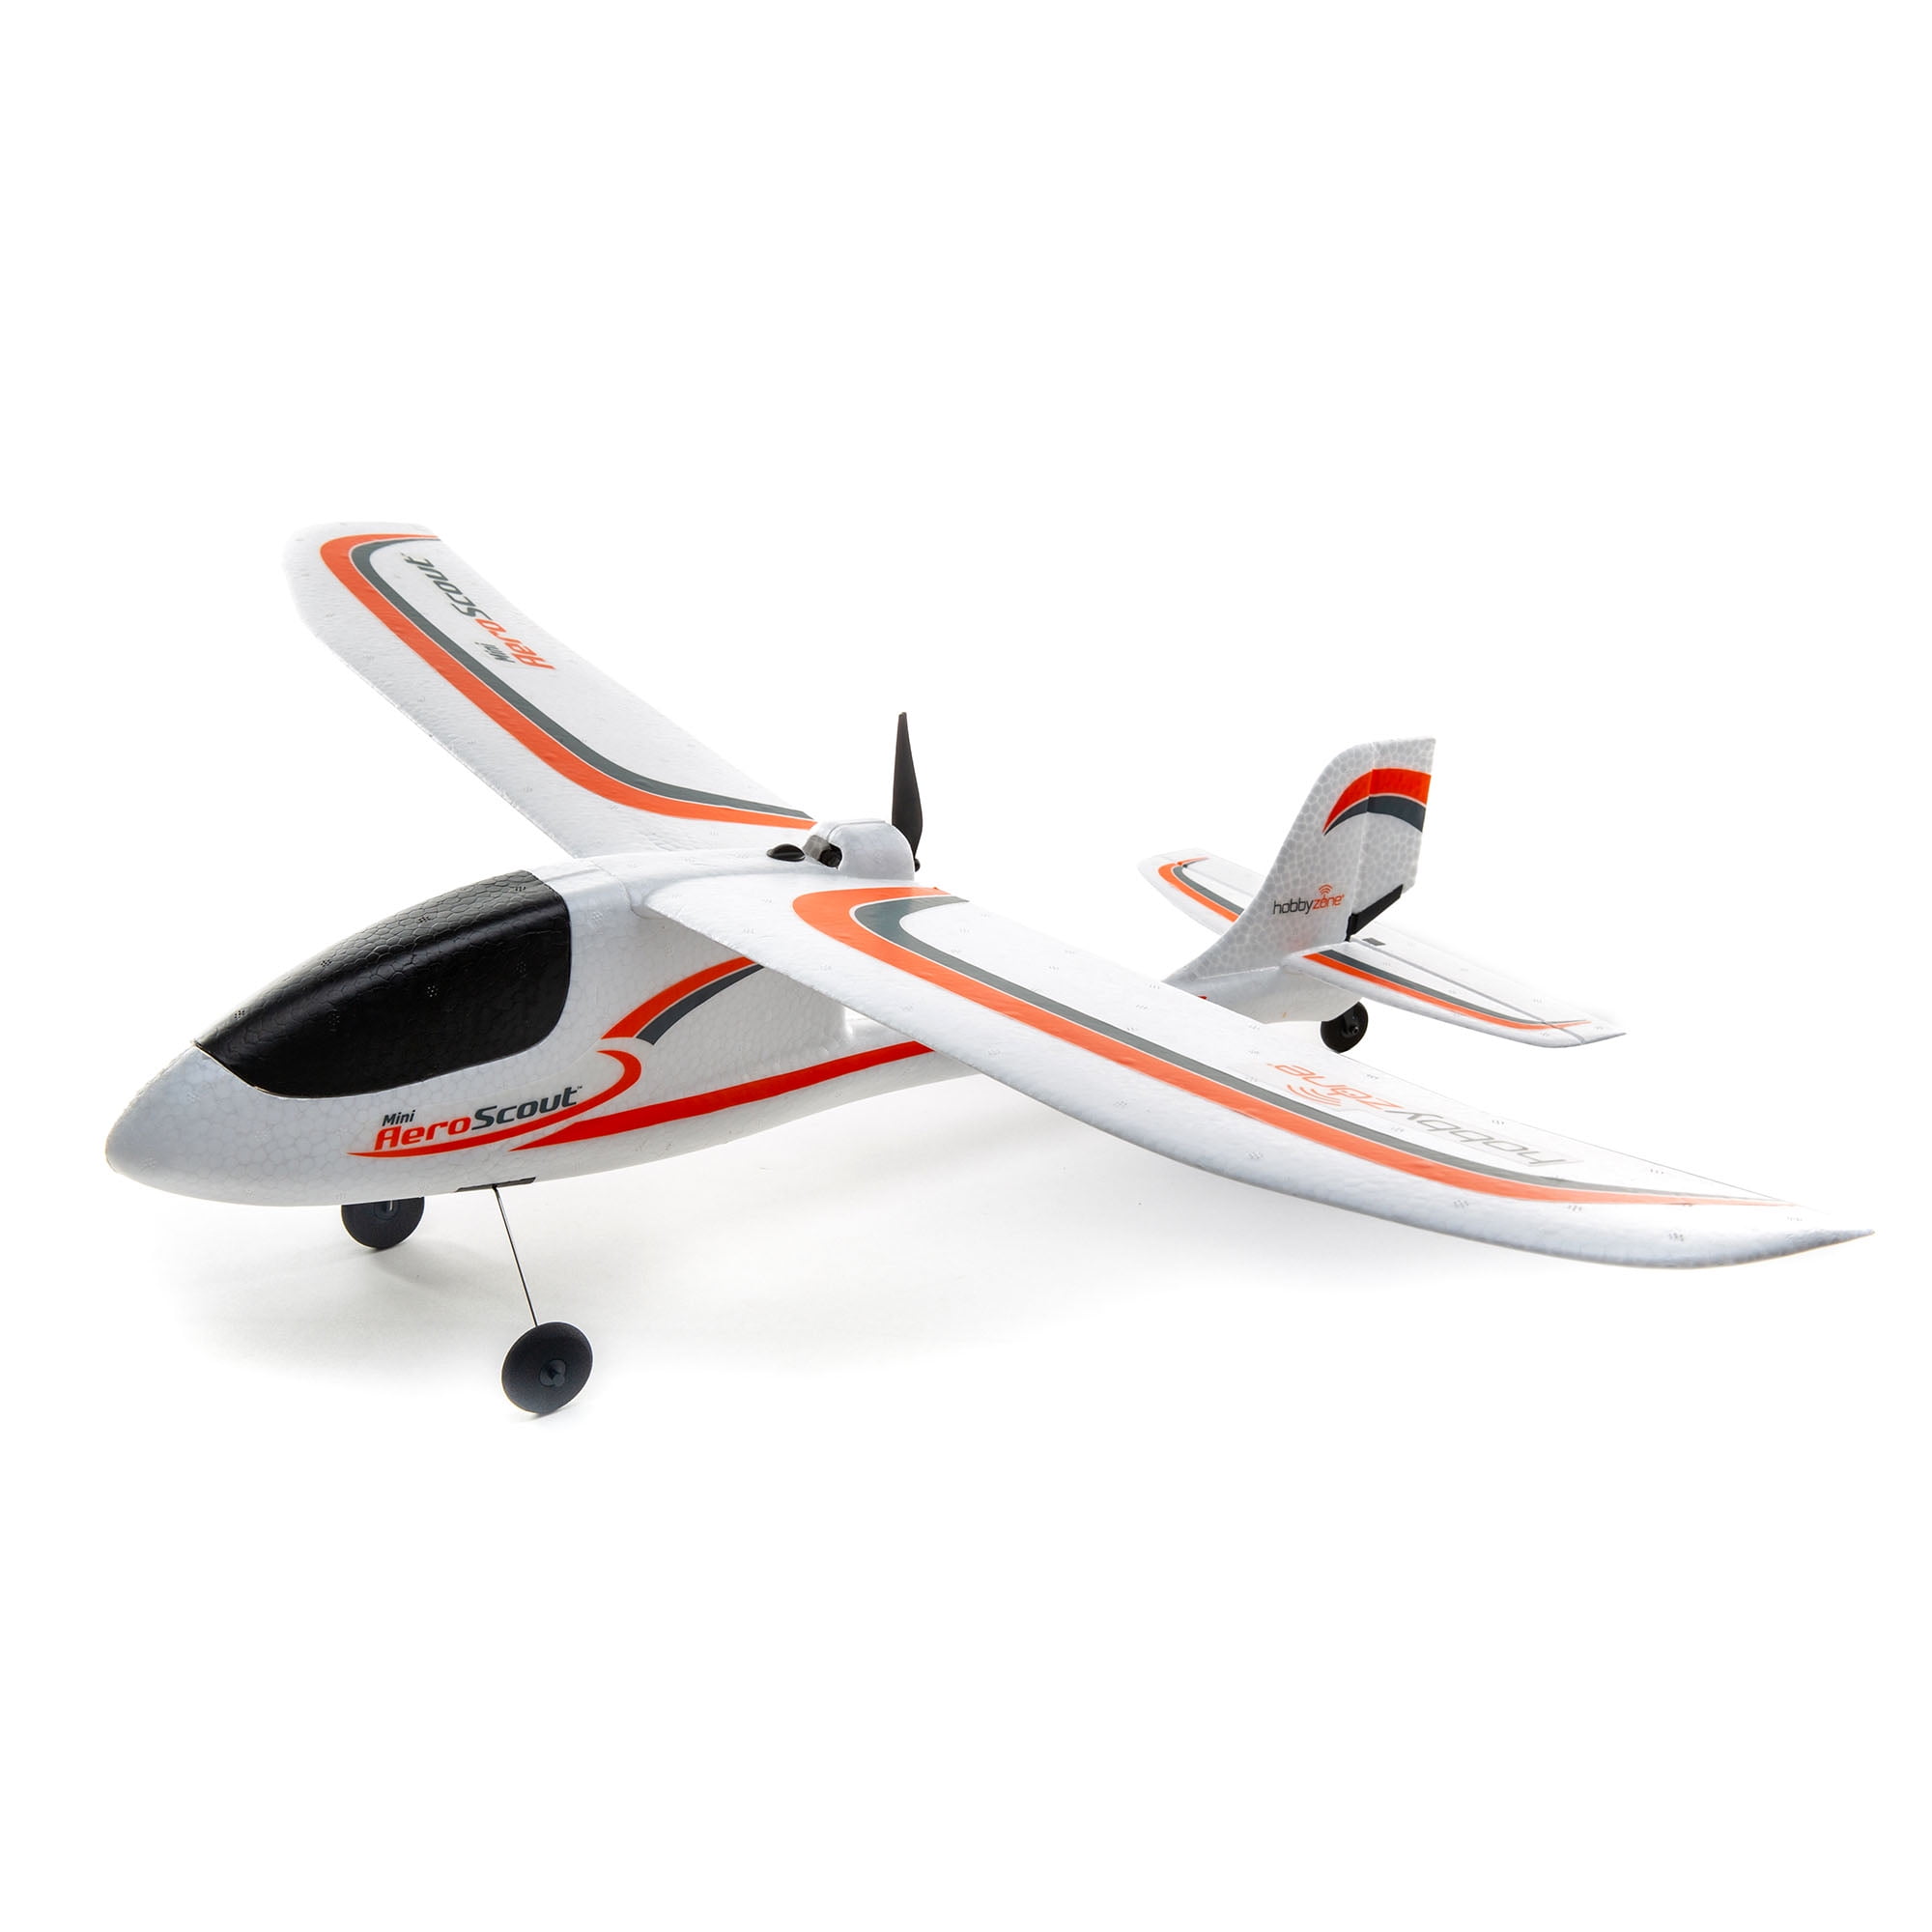 HobbyZone RC Airplane Mini AeroScout RTF Includes controller transmitter battery and charger HBZ5700 Airplanes RTF Trainers